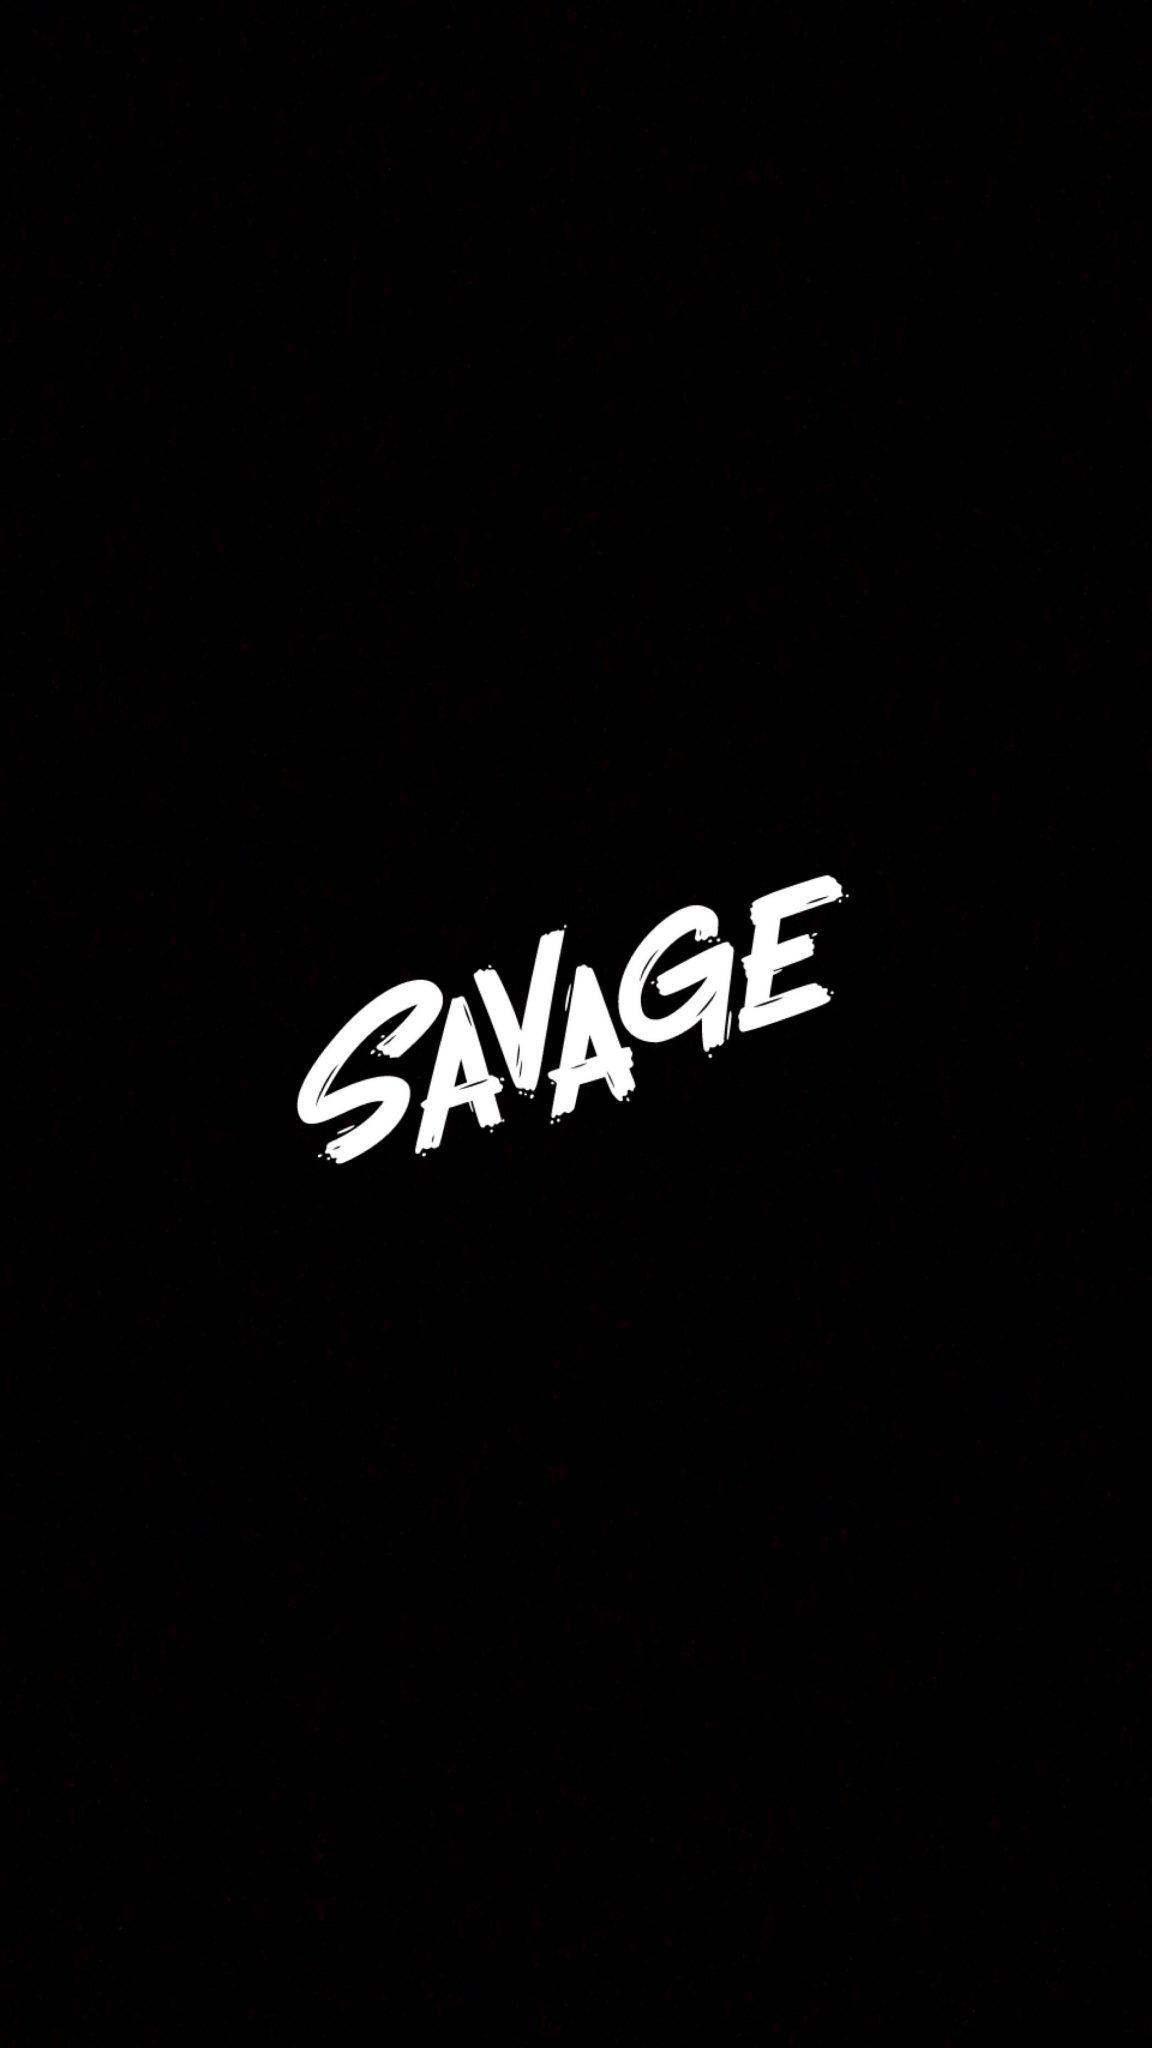 Savage iPhone Wallpapers - Top Free Savage iPhone Backgrounds ...